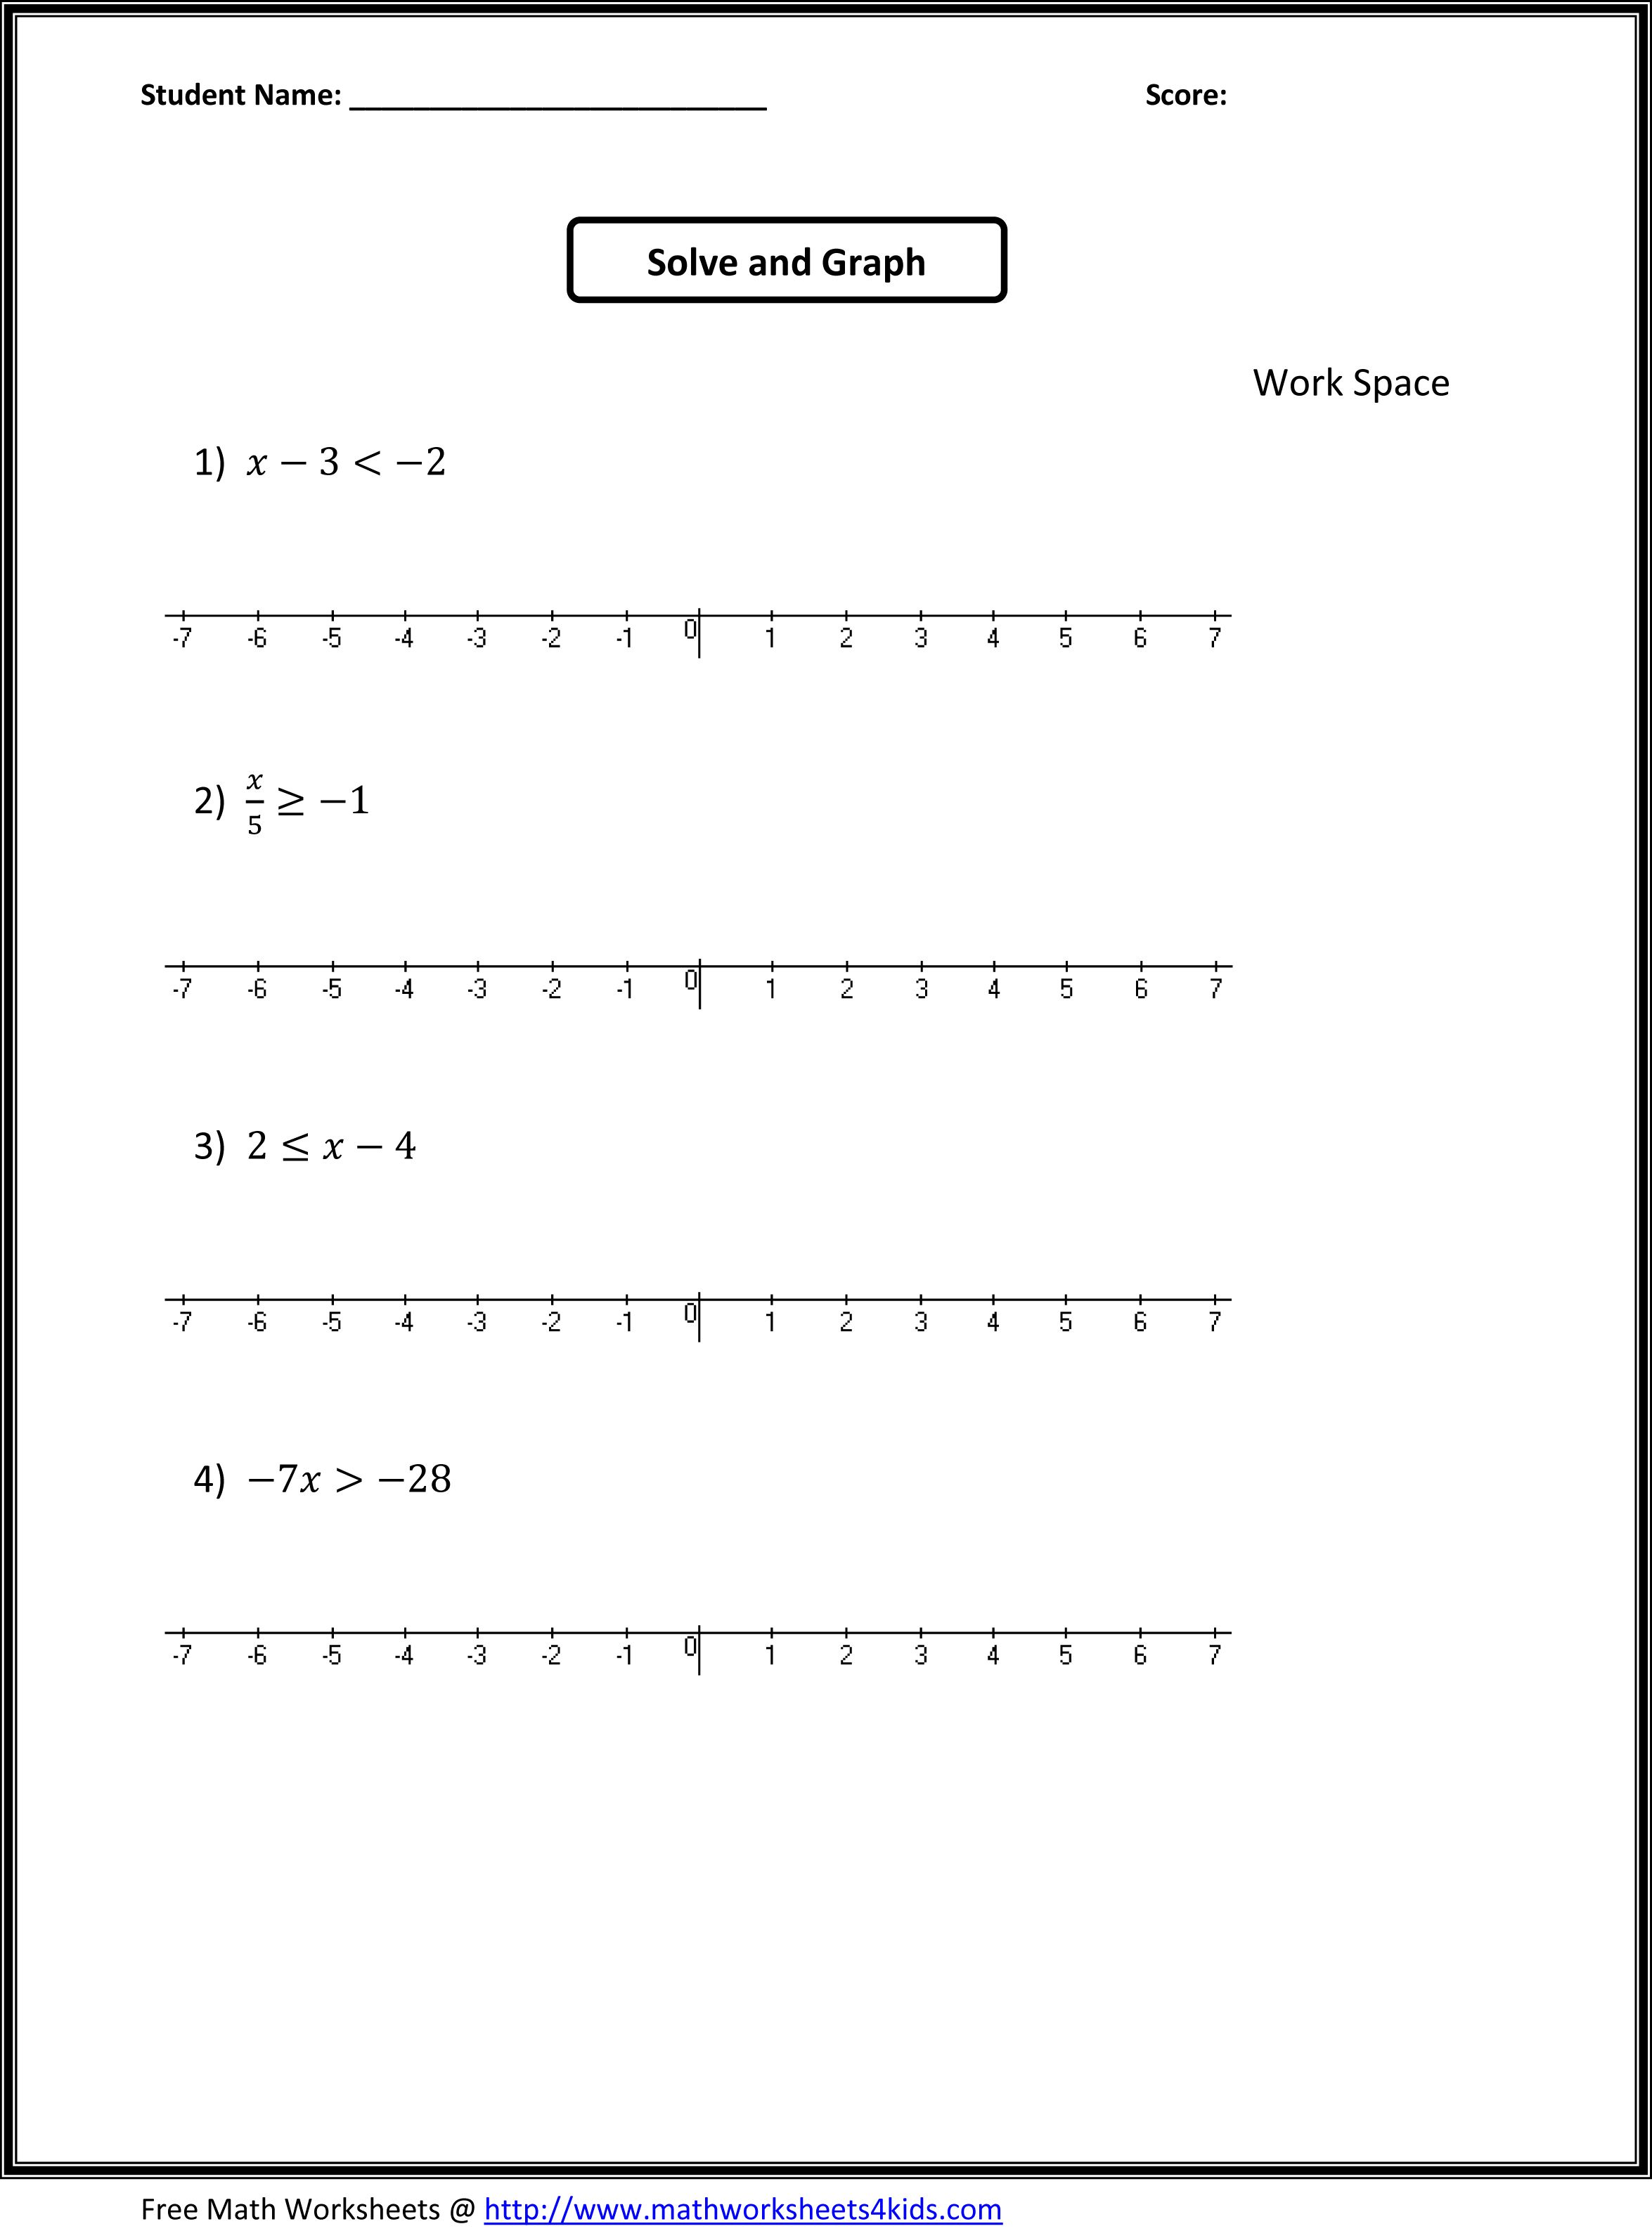 Printables Math Worksheets For 7th Graders 7th grade math worksheets value absolute algebra worksheets